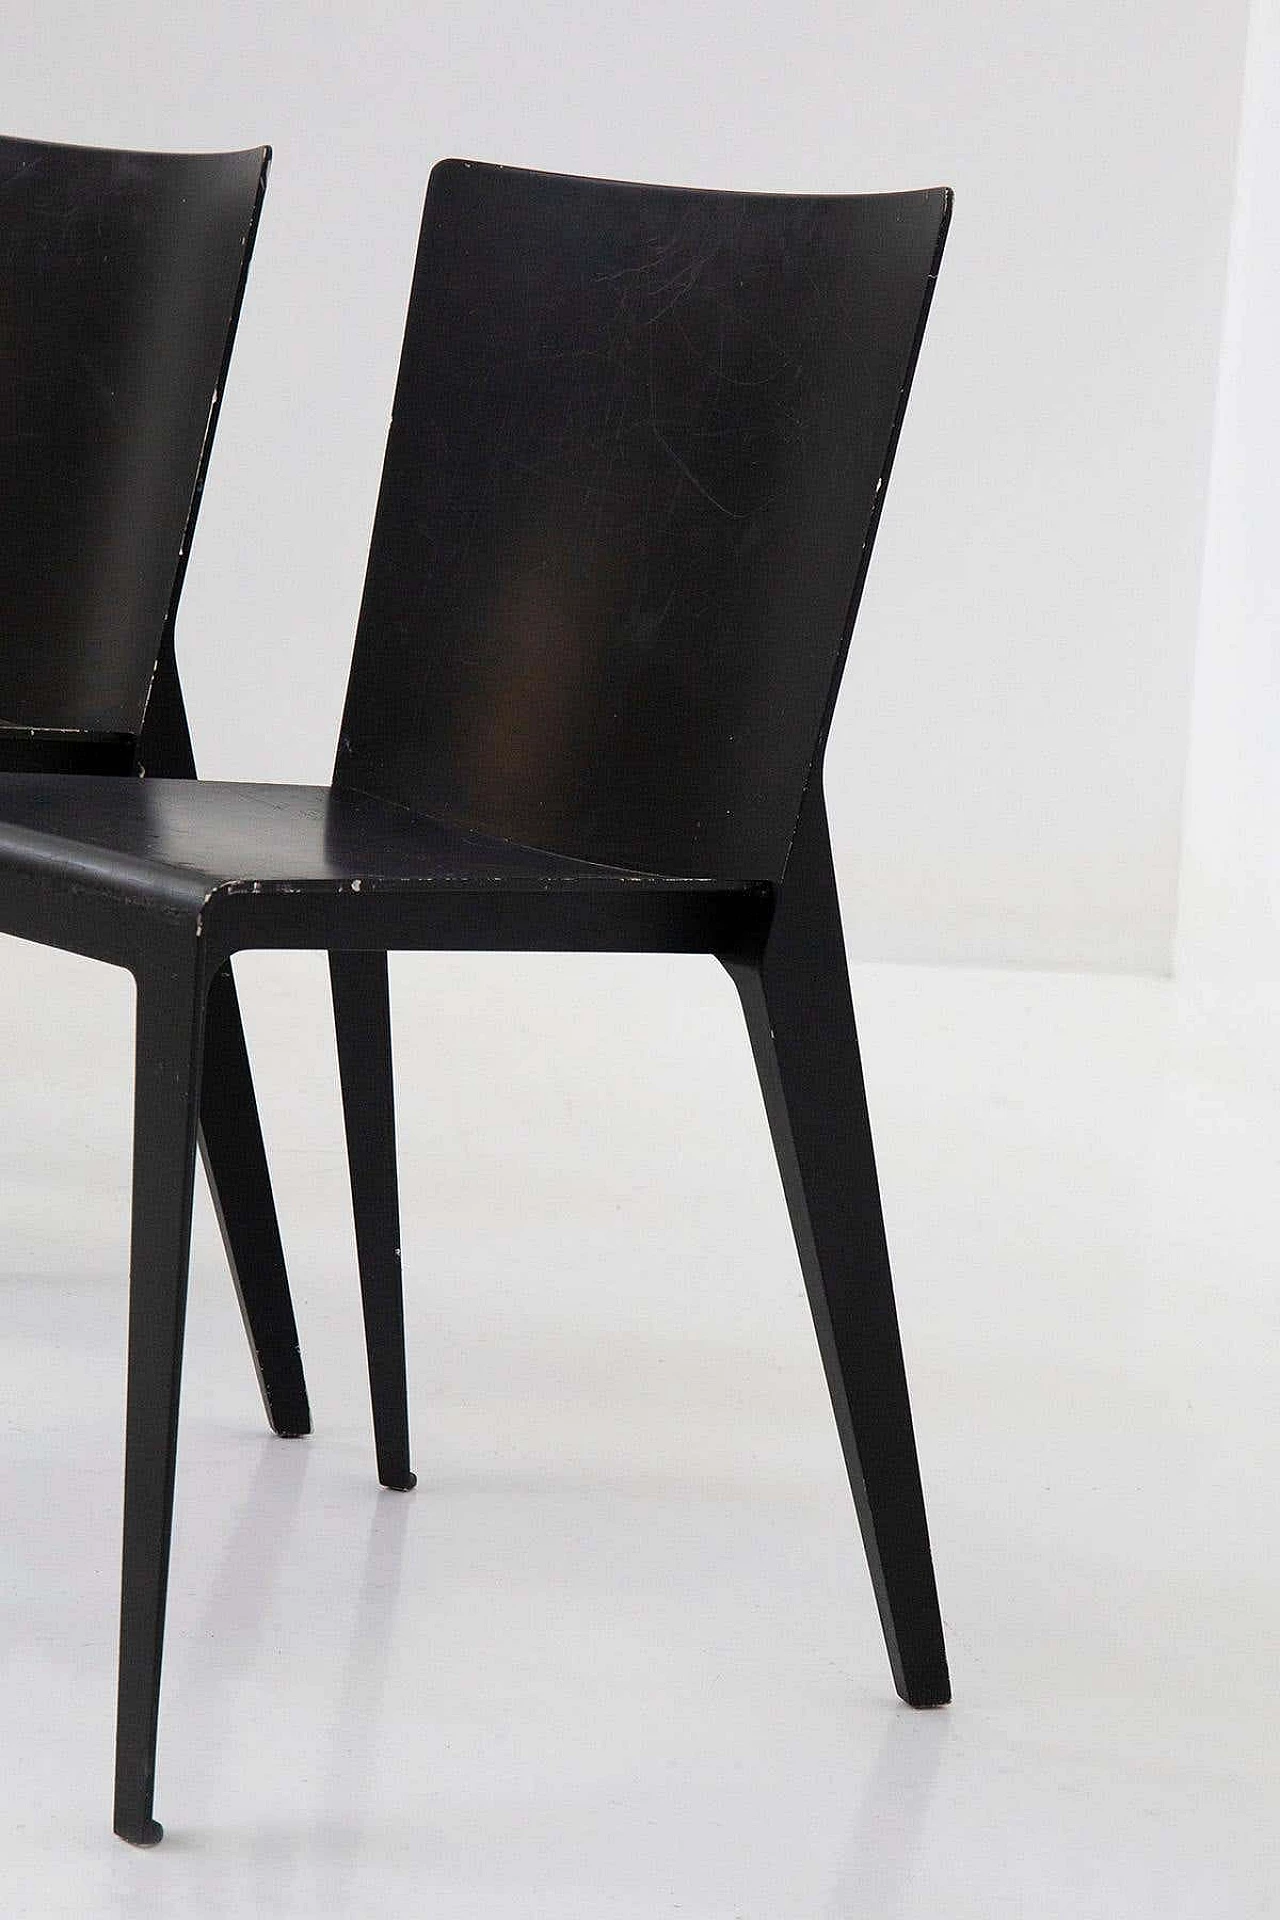 5 Alfa chairs by Hannes Wettstein for Molteni, 2001 5